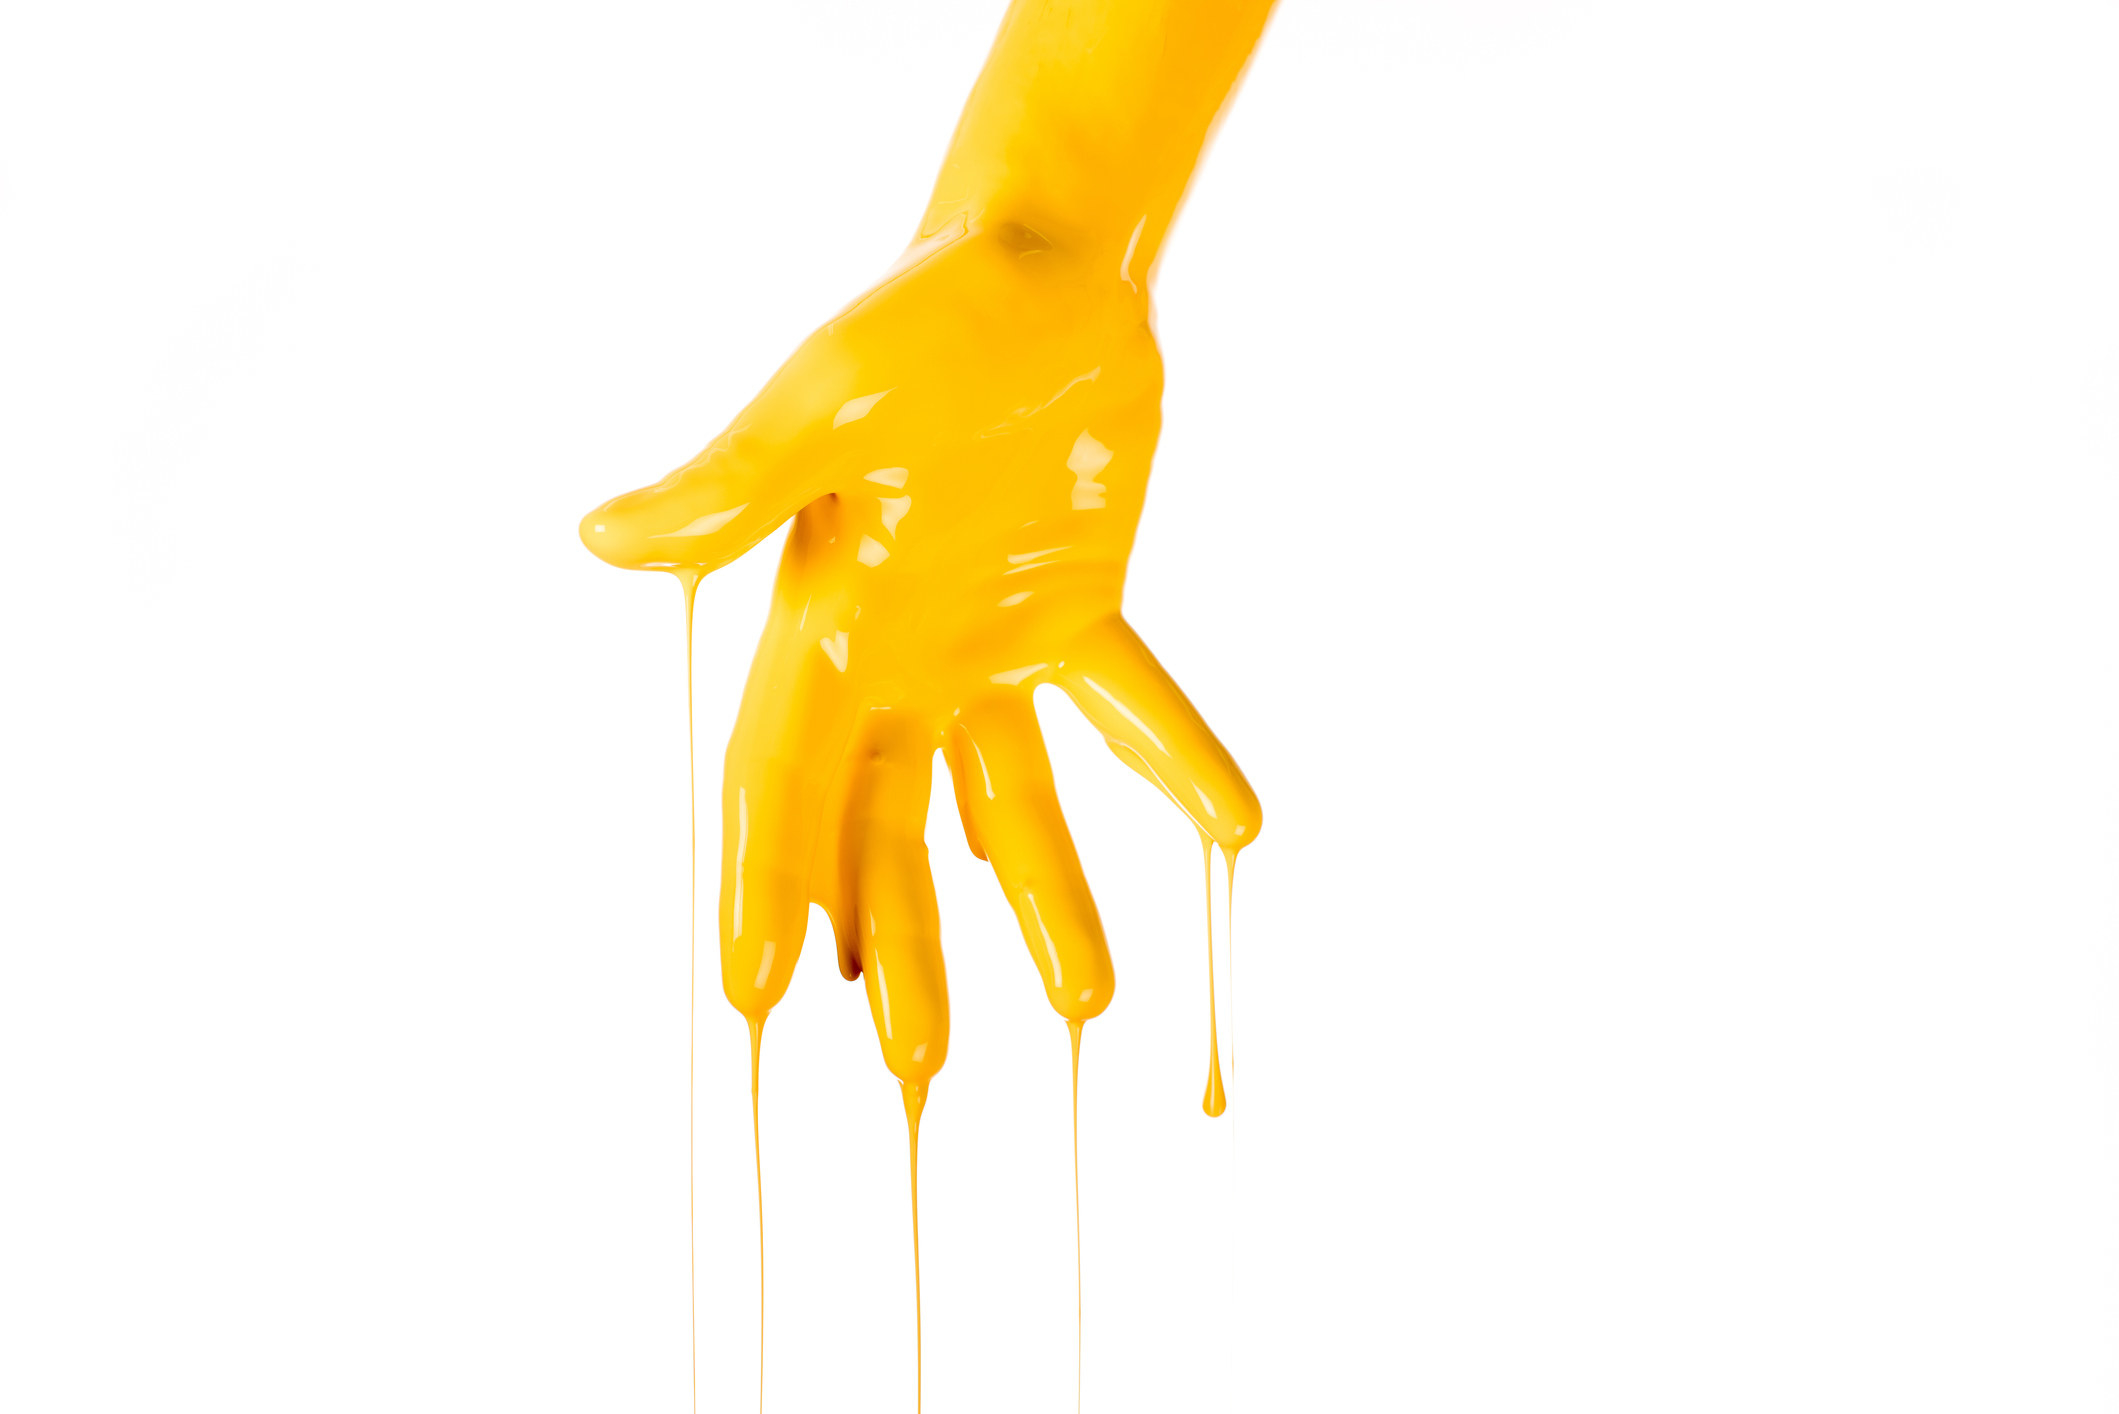 A gloved hand soaked in some type of liquid